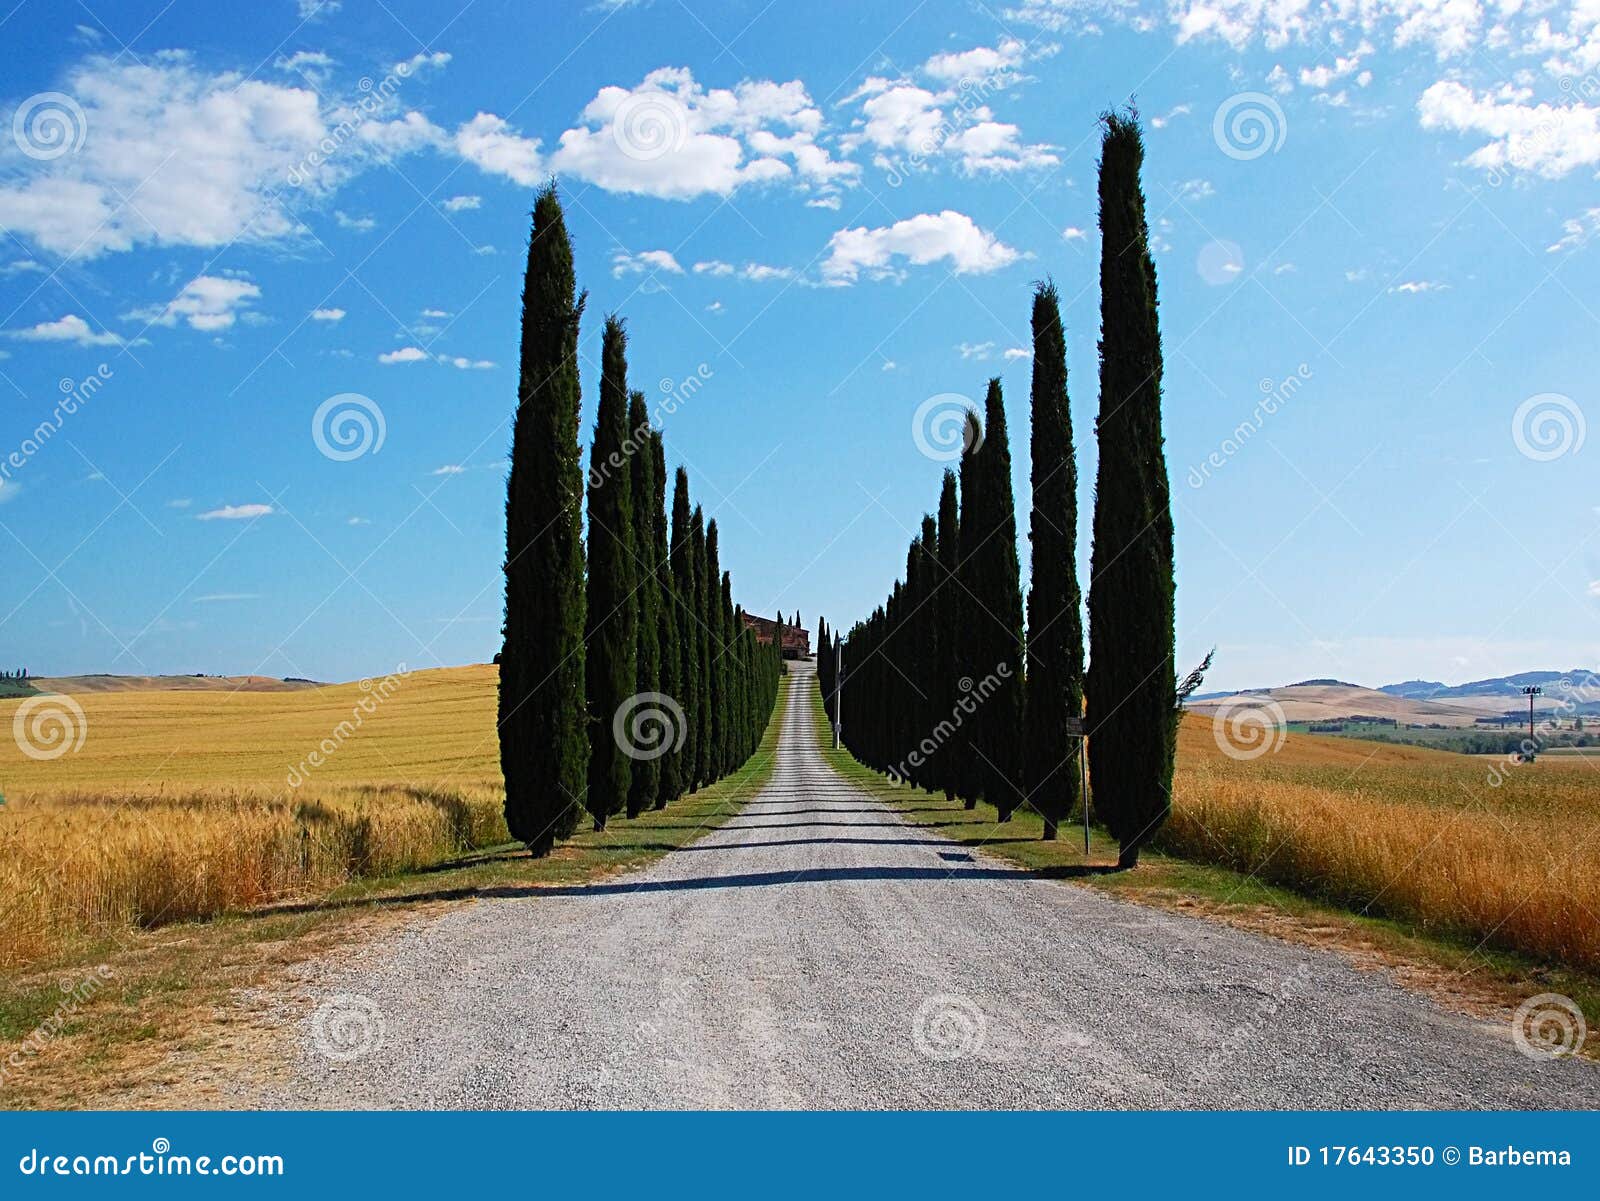 avenue lined with cypress